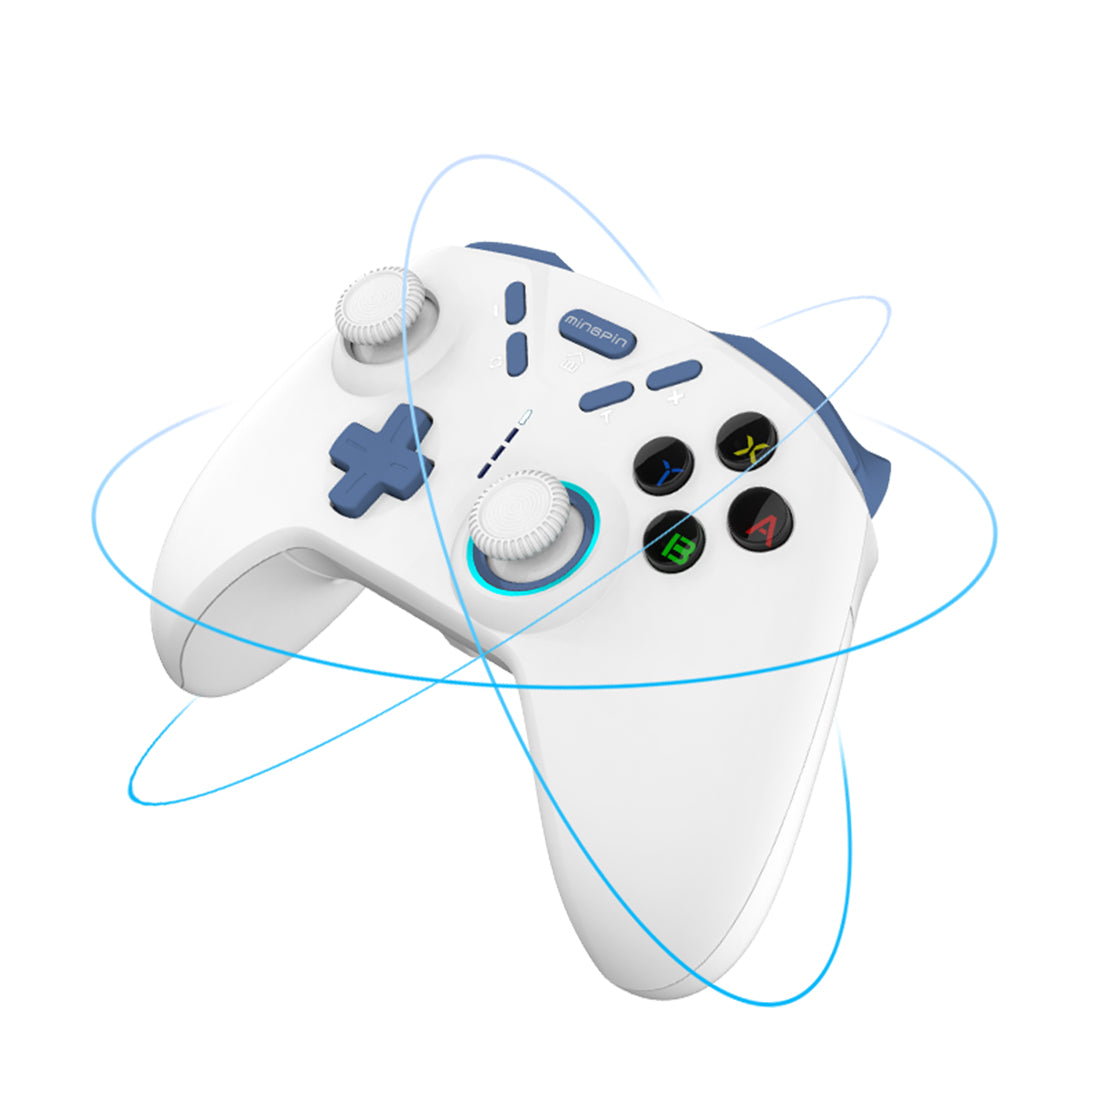 litnxt-wireless-game-controller-with-motion-sensing-and-LED-5